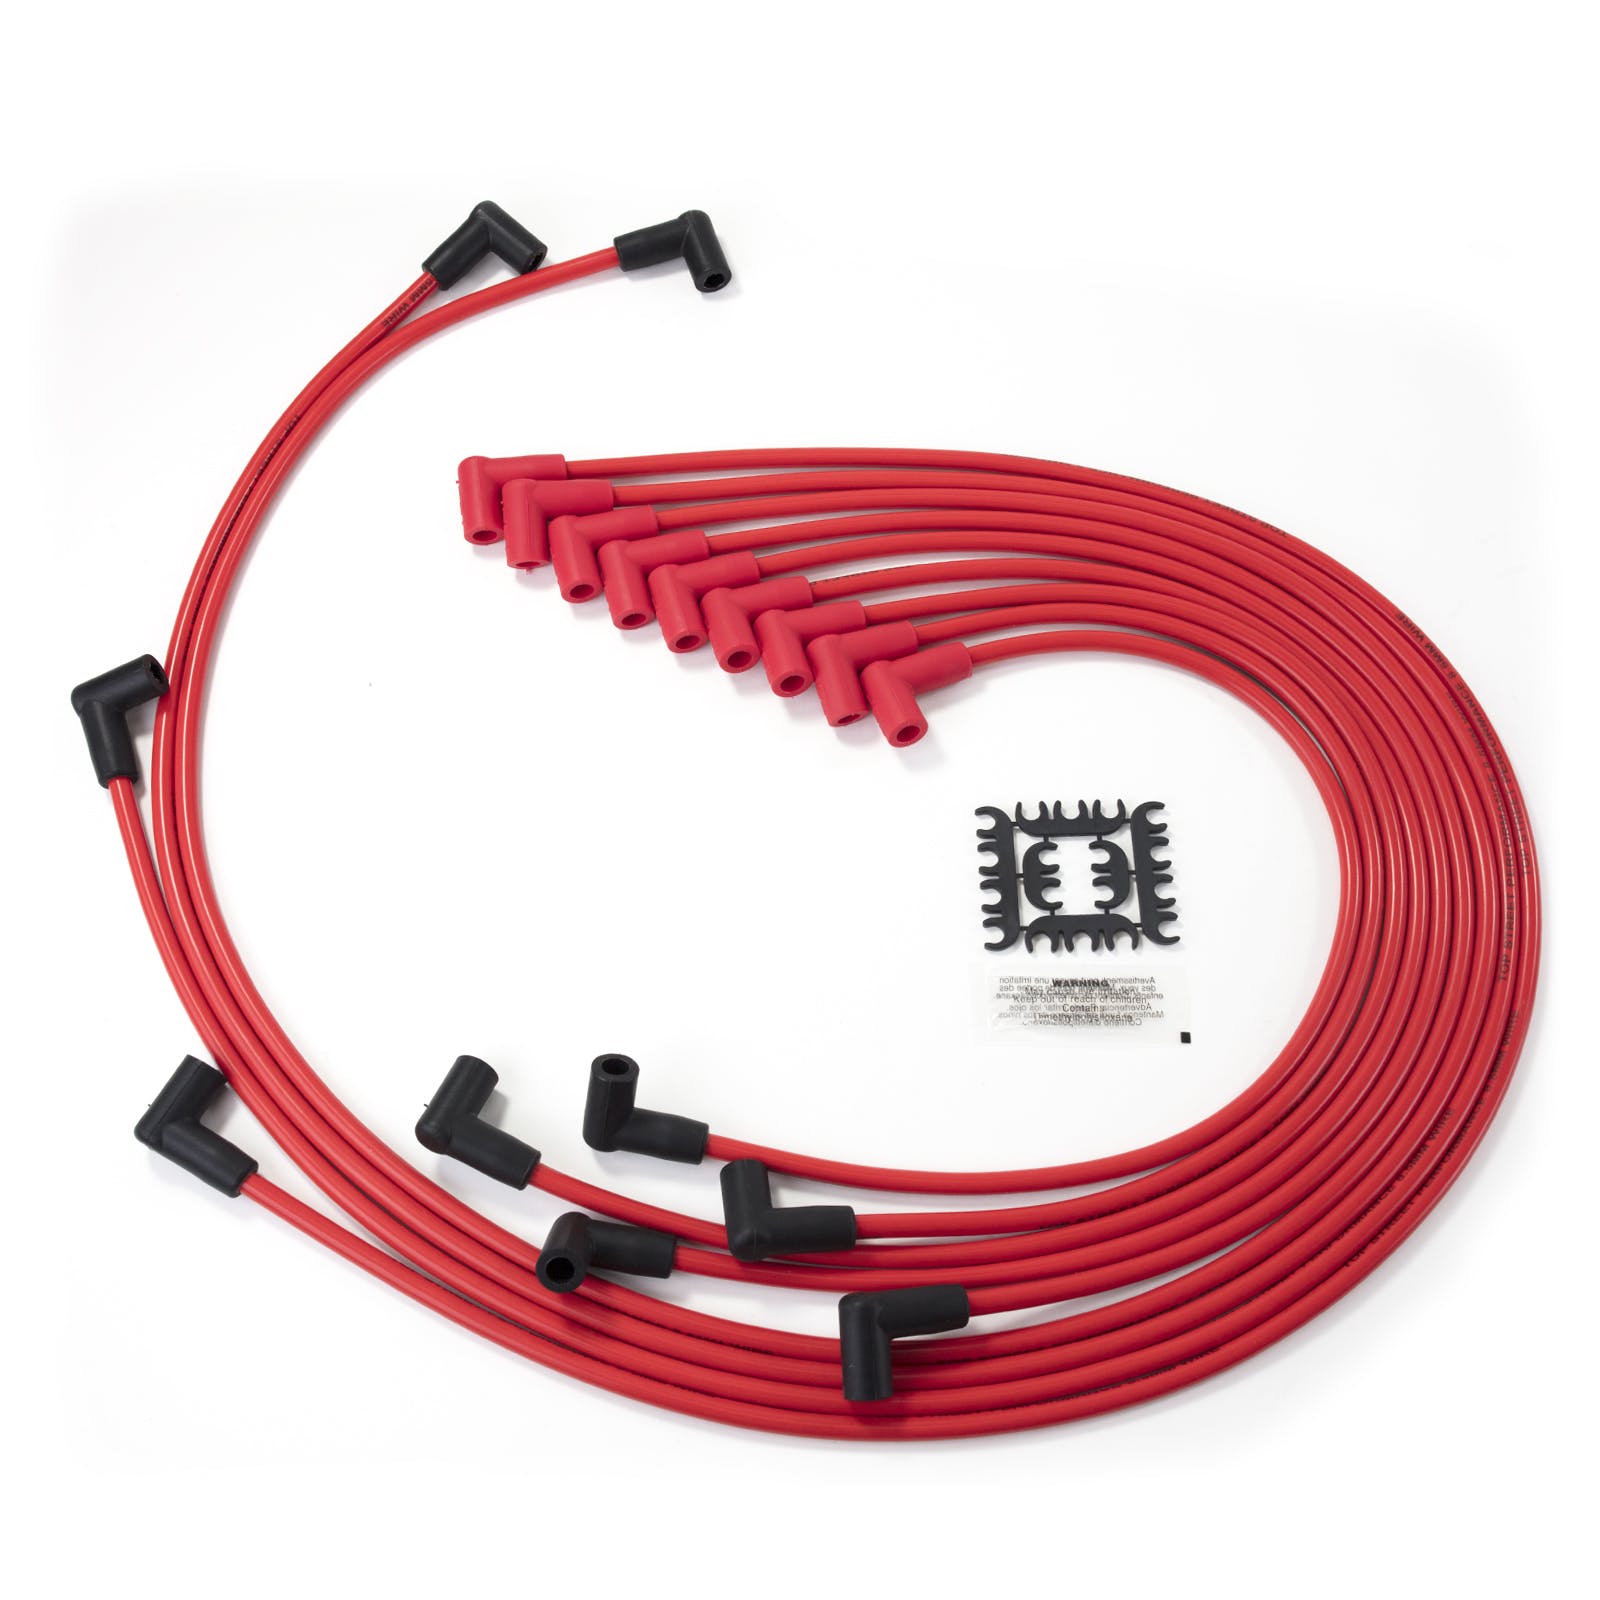 Top Street Performance 82290 8.5mm Chevy SB Spark Plug Wire Set with 90° Plug Boots, Red